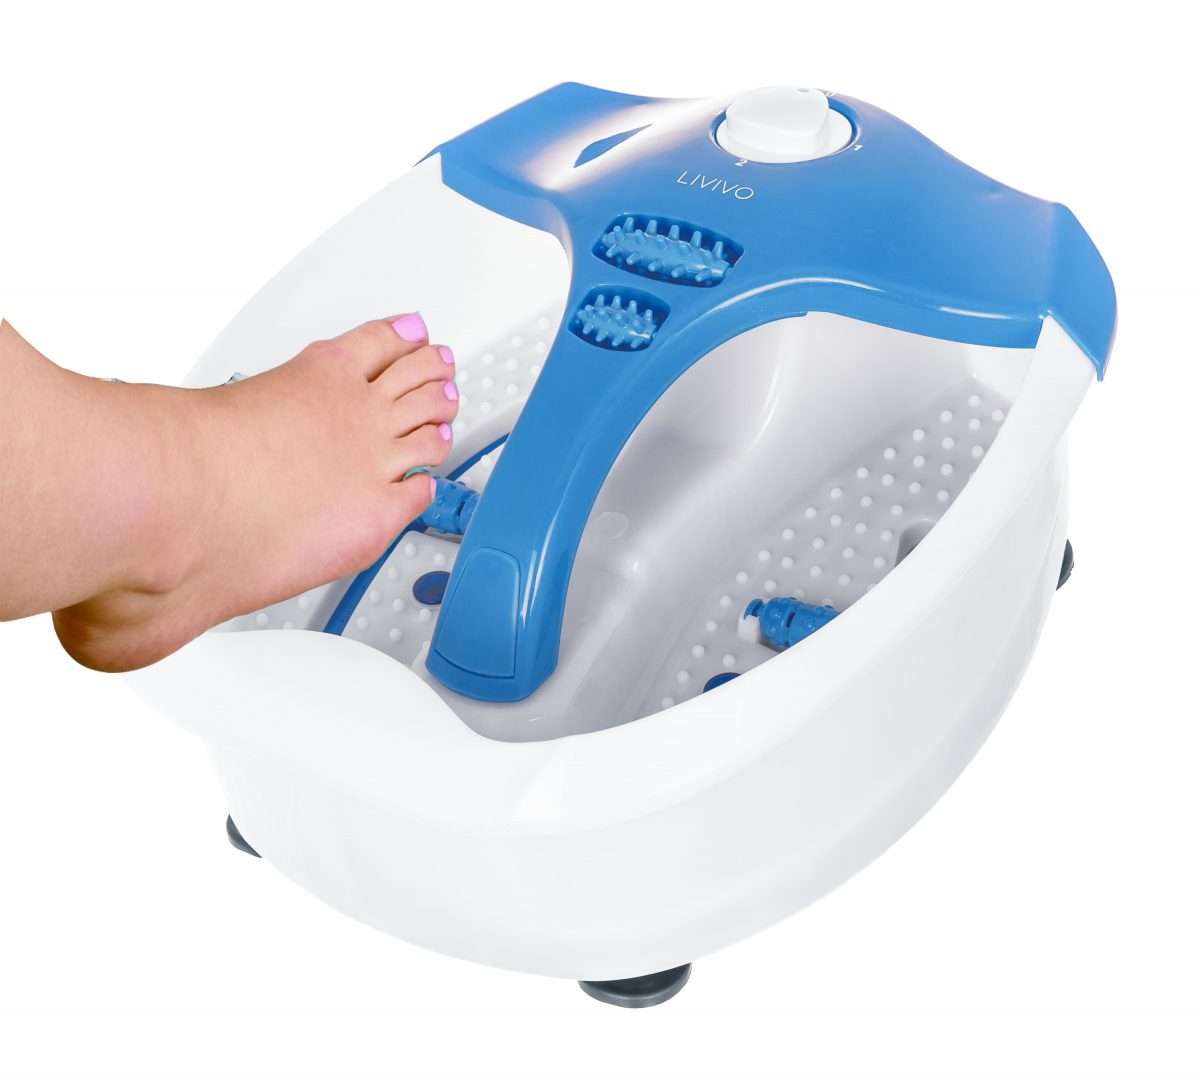 INFRARED VIBRATING WET BATH FOOT SPA MASSAGER PEDICURE FOOTSPA SOOTHING ...